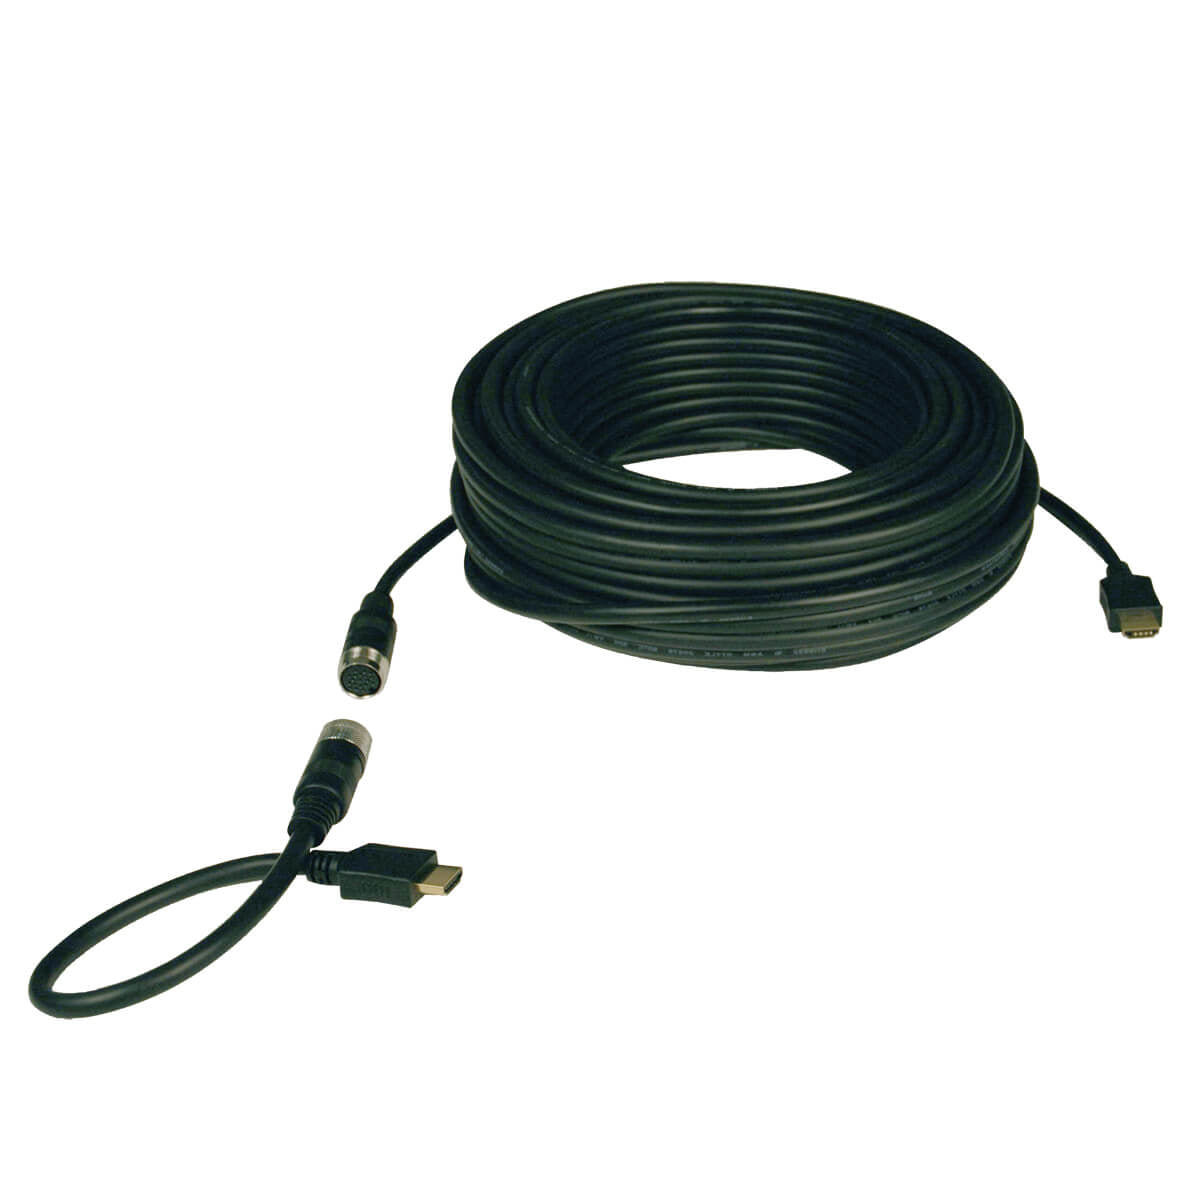 Tripp Lite P568-025-Ez Hdmi Easy Pull Cable, Digital Video With Audio (M/M), 25 Ft.